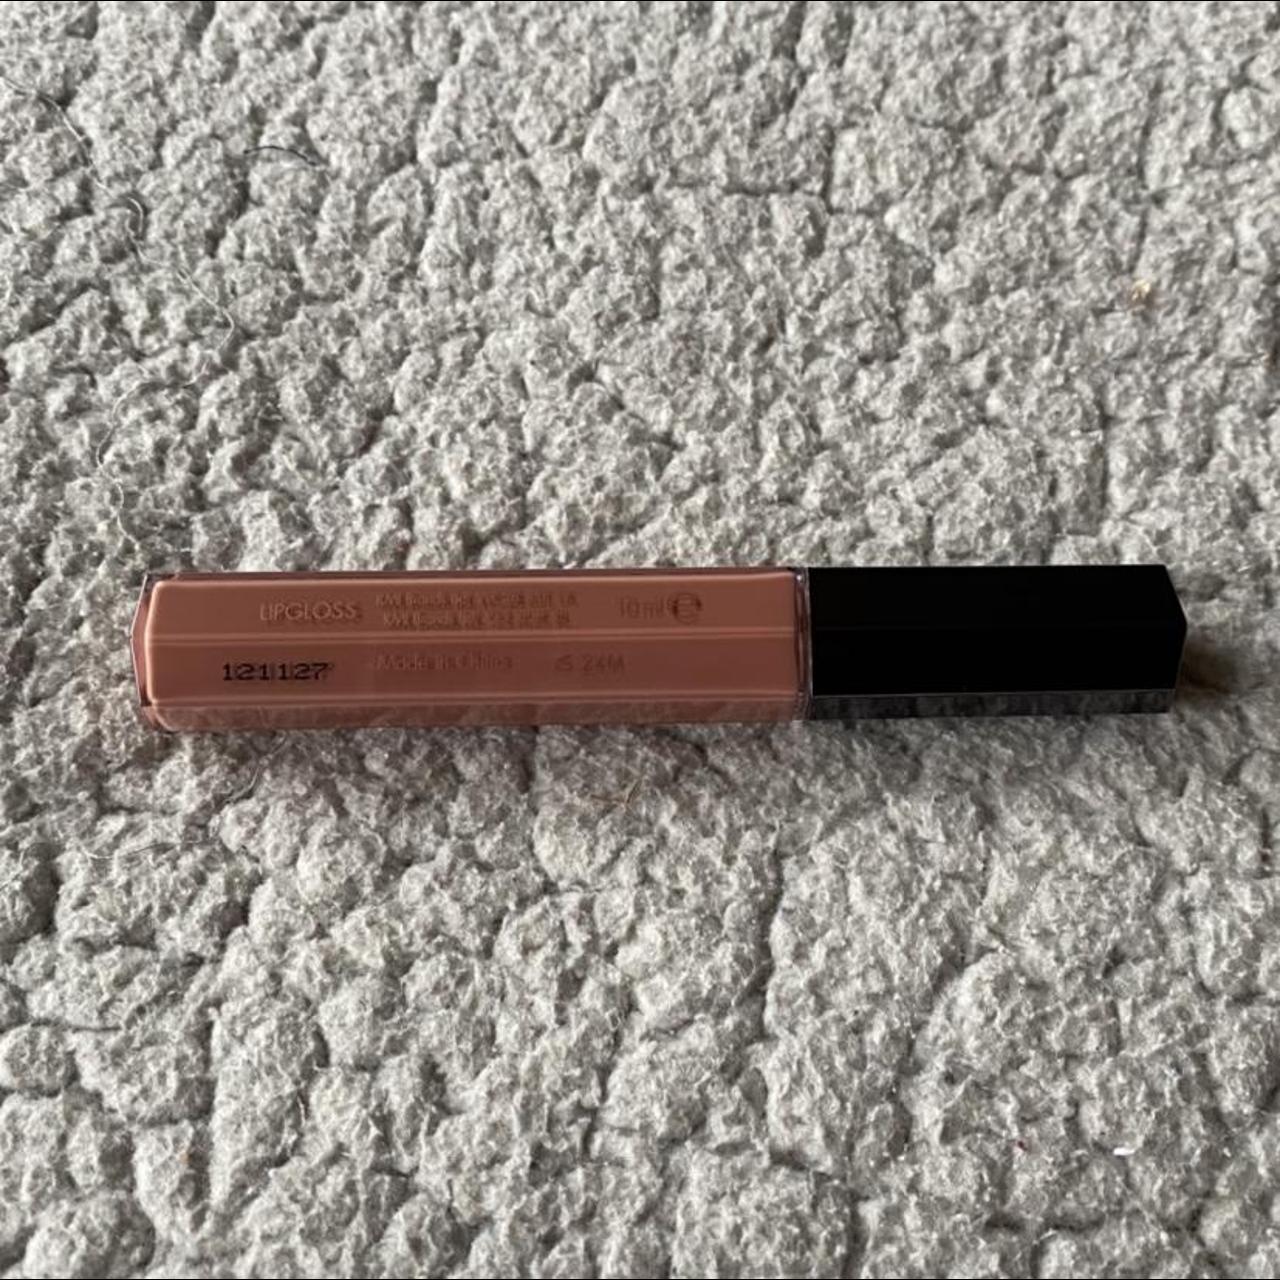 Product Image 2 - Ted Baker Lipgloss - Soft